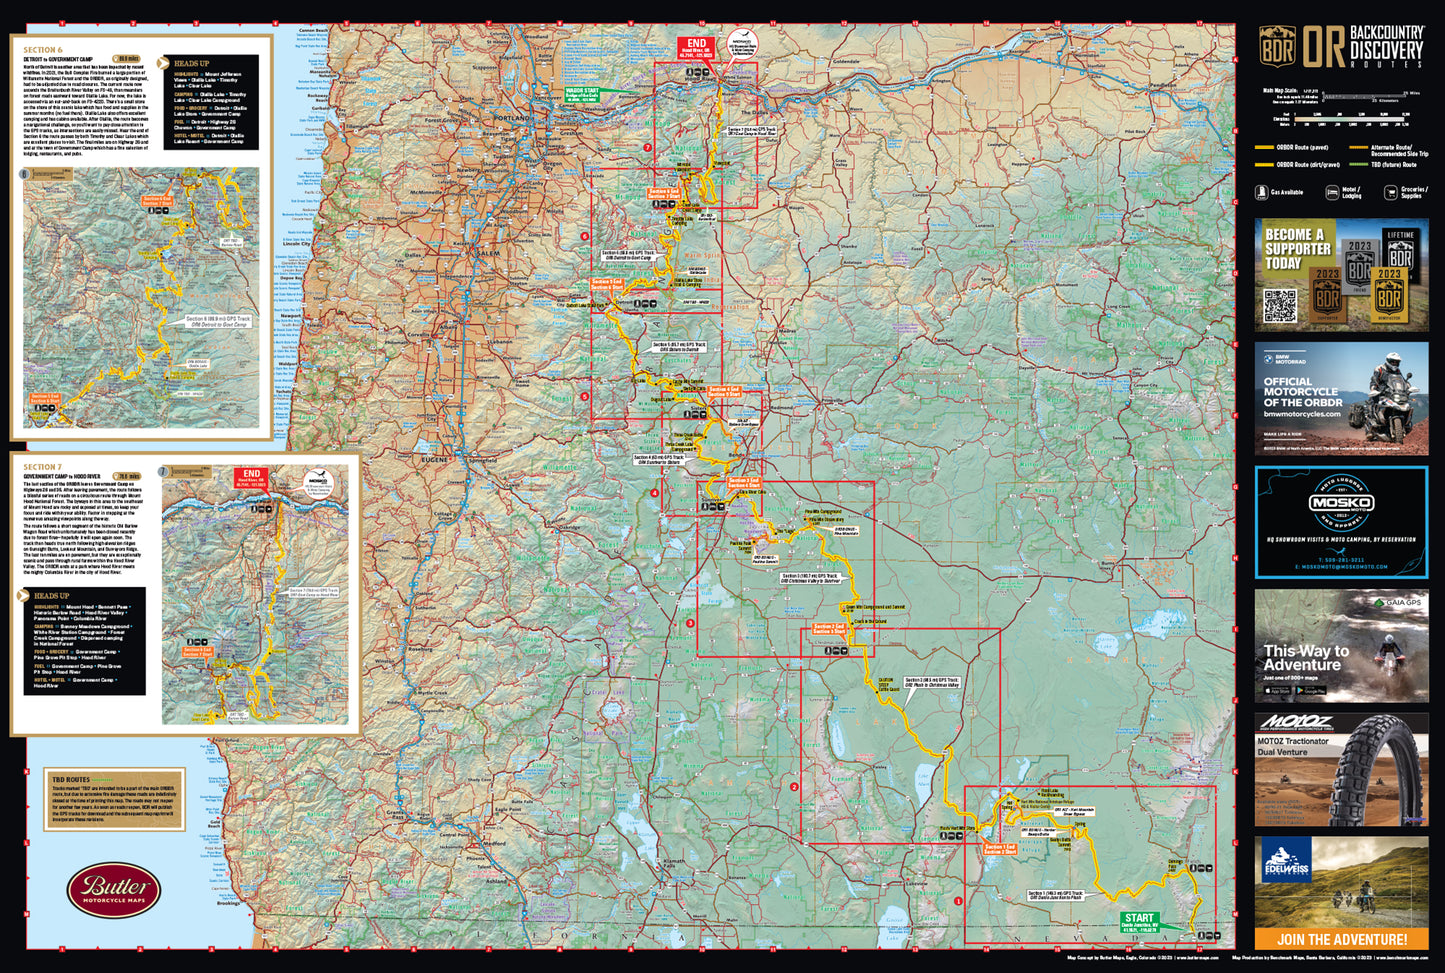 Oregon Backcountry Discovery Route (ORBDR) Map